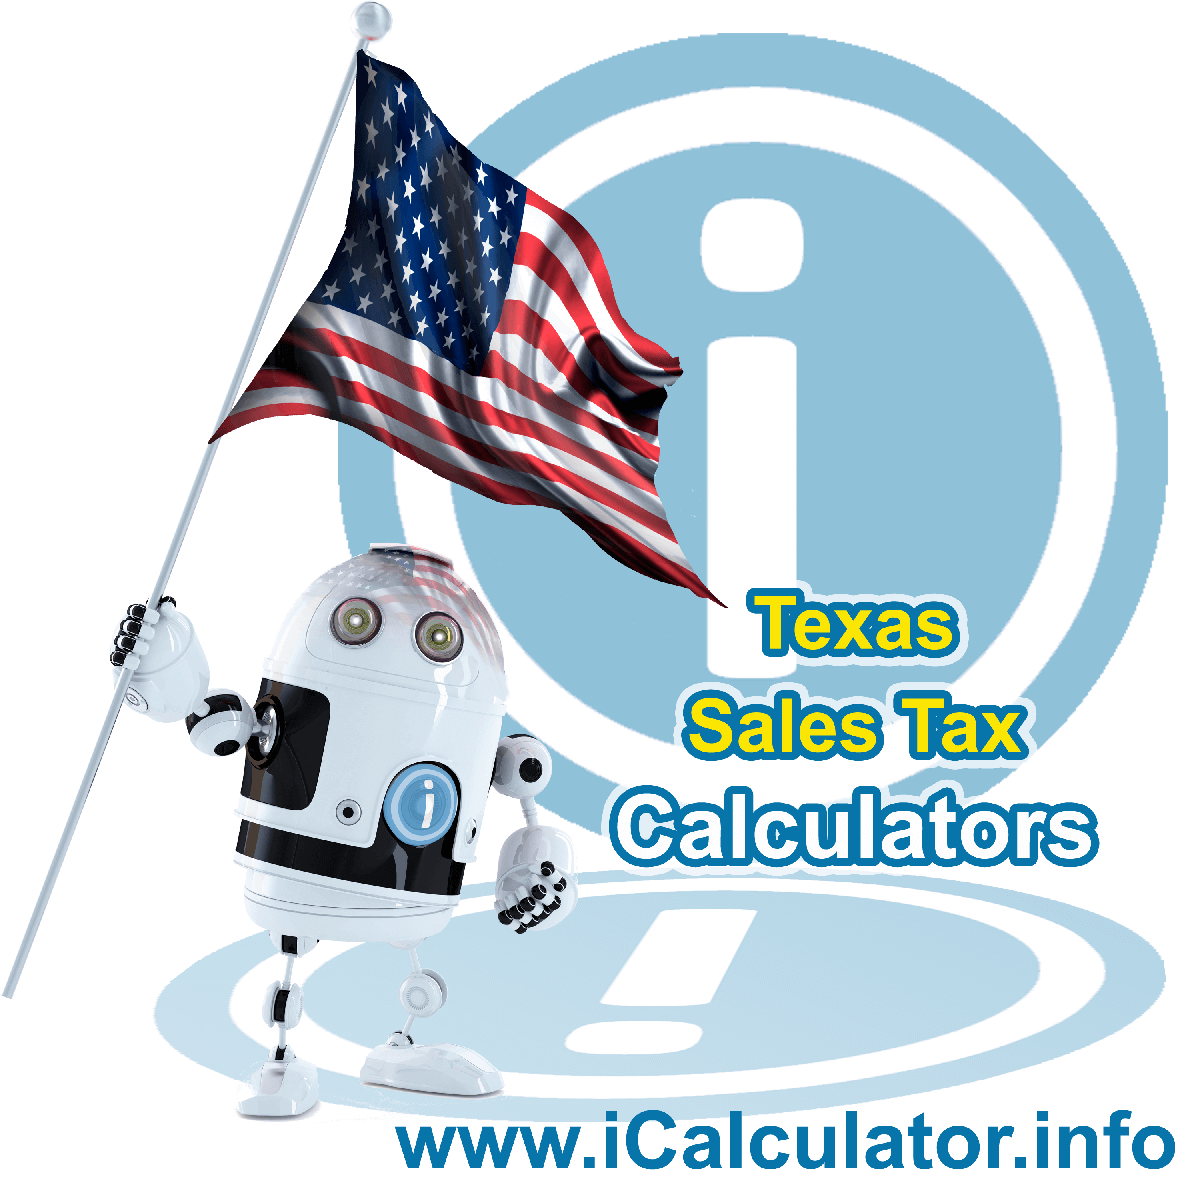 Texas Sales Tax Comparison Calculator: This image illustrates a calculator robot comparing sales tax in Texas manually using the Texas Sales Tax Formula. You can use this information to compare Sales Tax manually or use the Texas Sales Tax Comparison Calculator to calculate and compare Texas sales tax online.